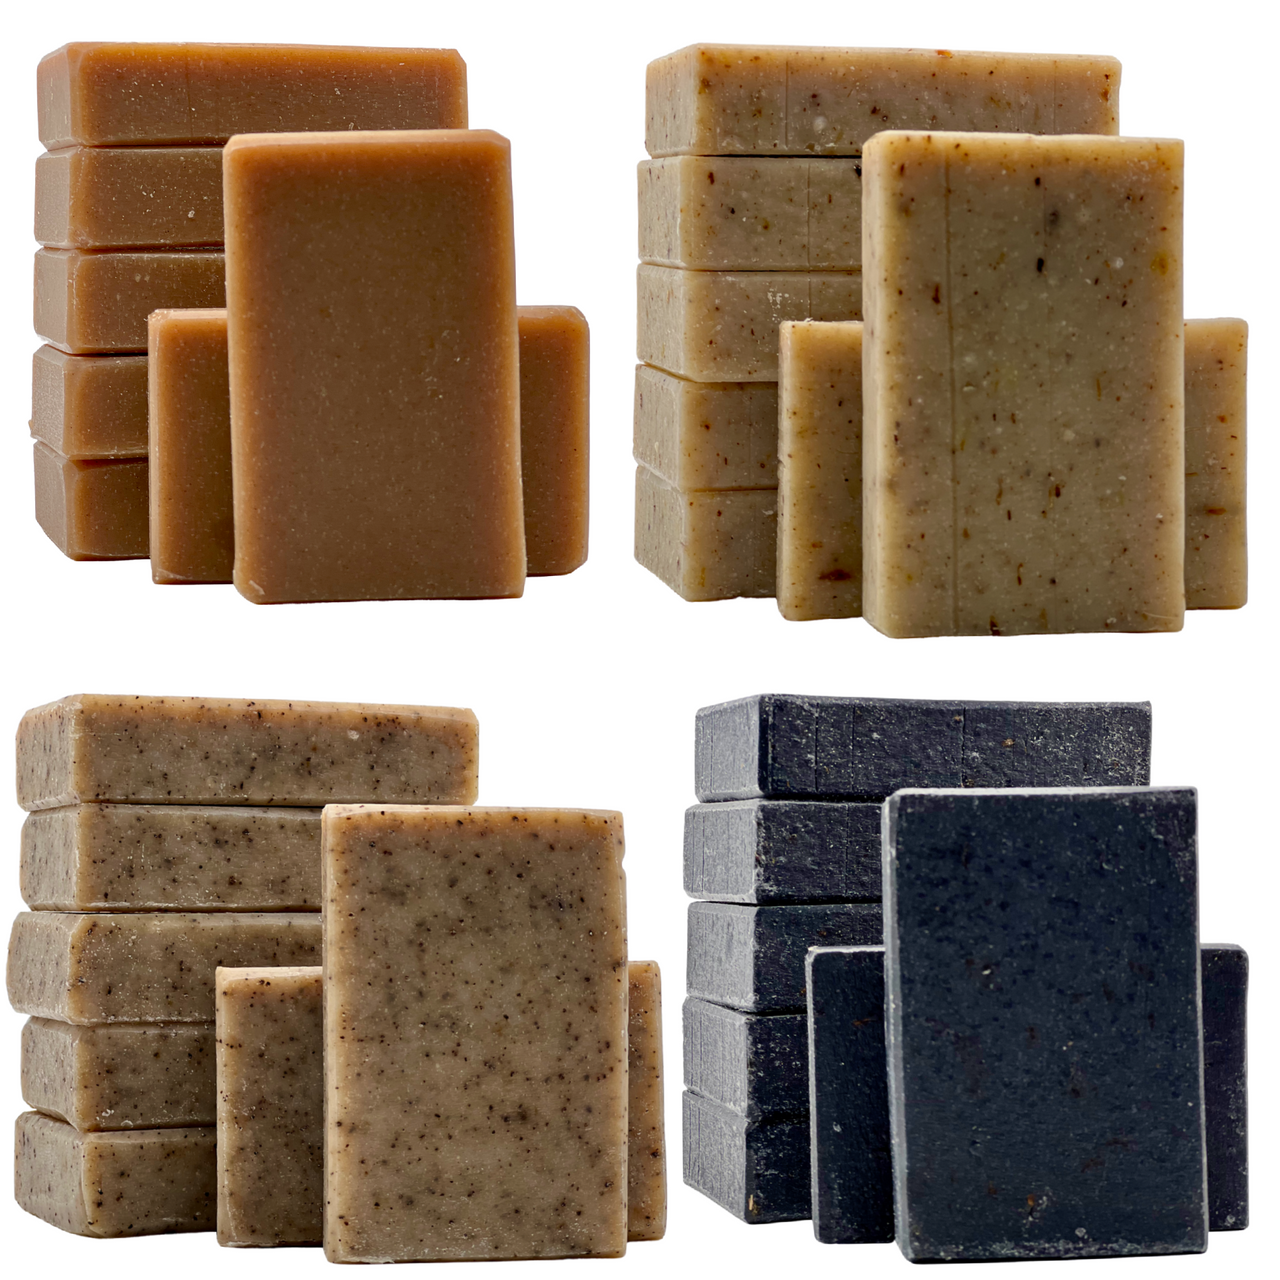 Simplici Natural Soaps ALL VARIETIES with Bulk Discounts